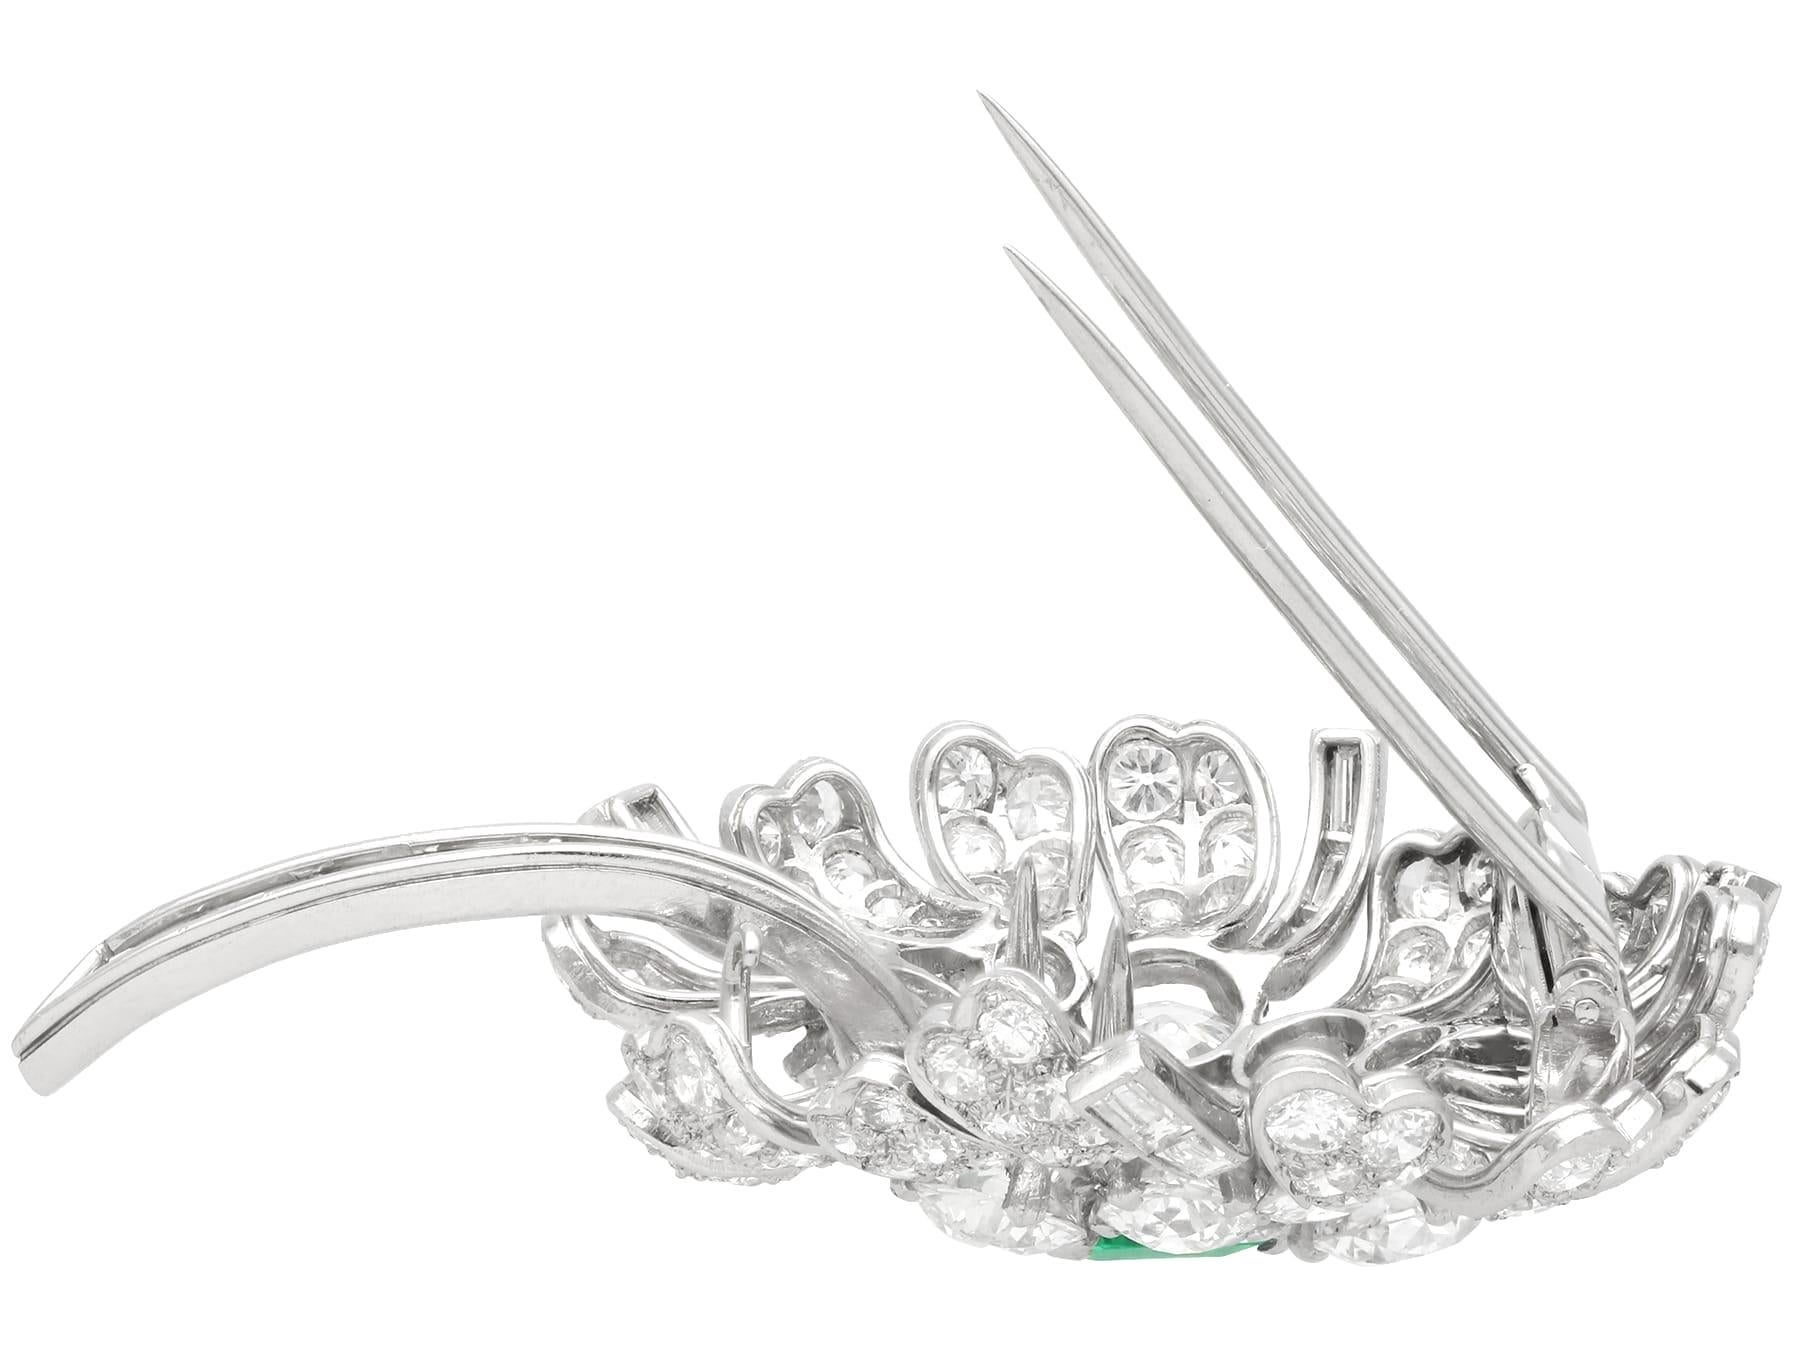 Antique 2.10Ct Emerald and 7.73Ct Diamond Platinum Floral Brooch Circa 1900 For Sale 2